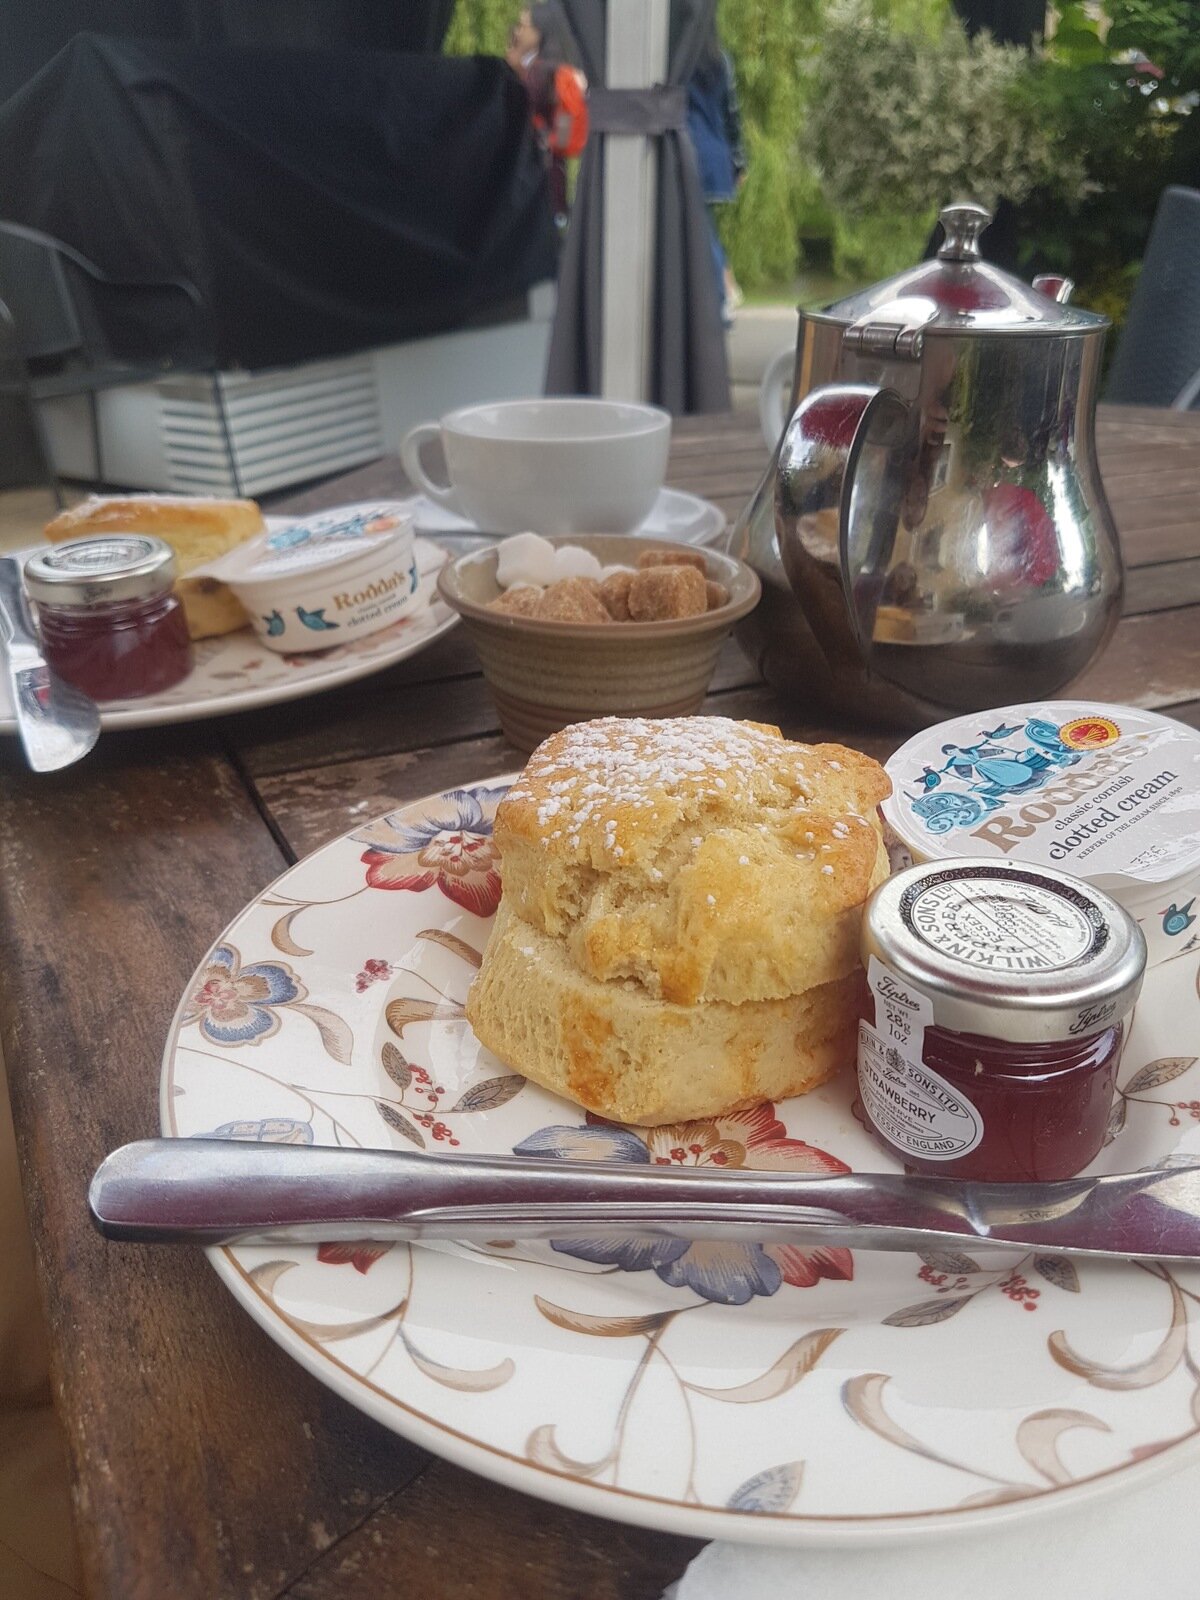 English tea and scones in the cotswolds with jam